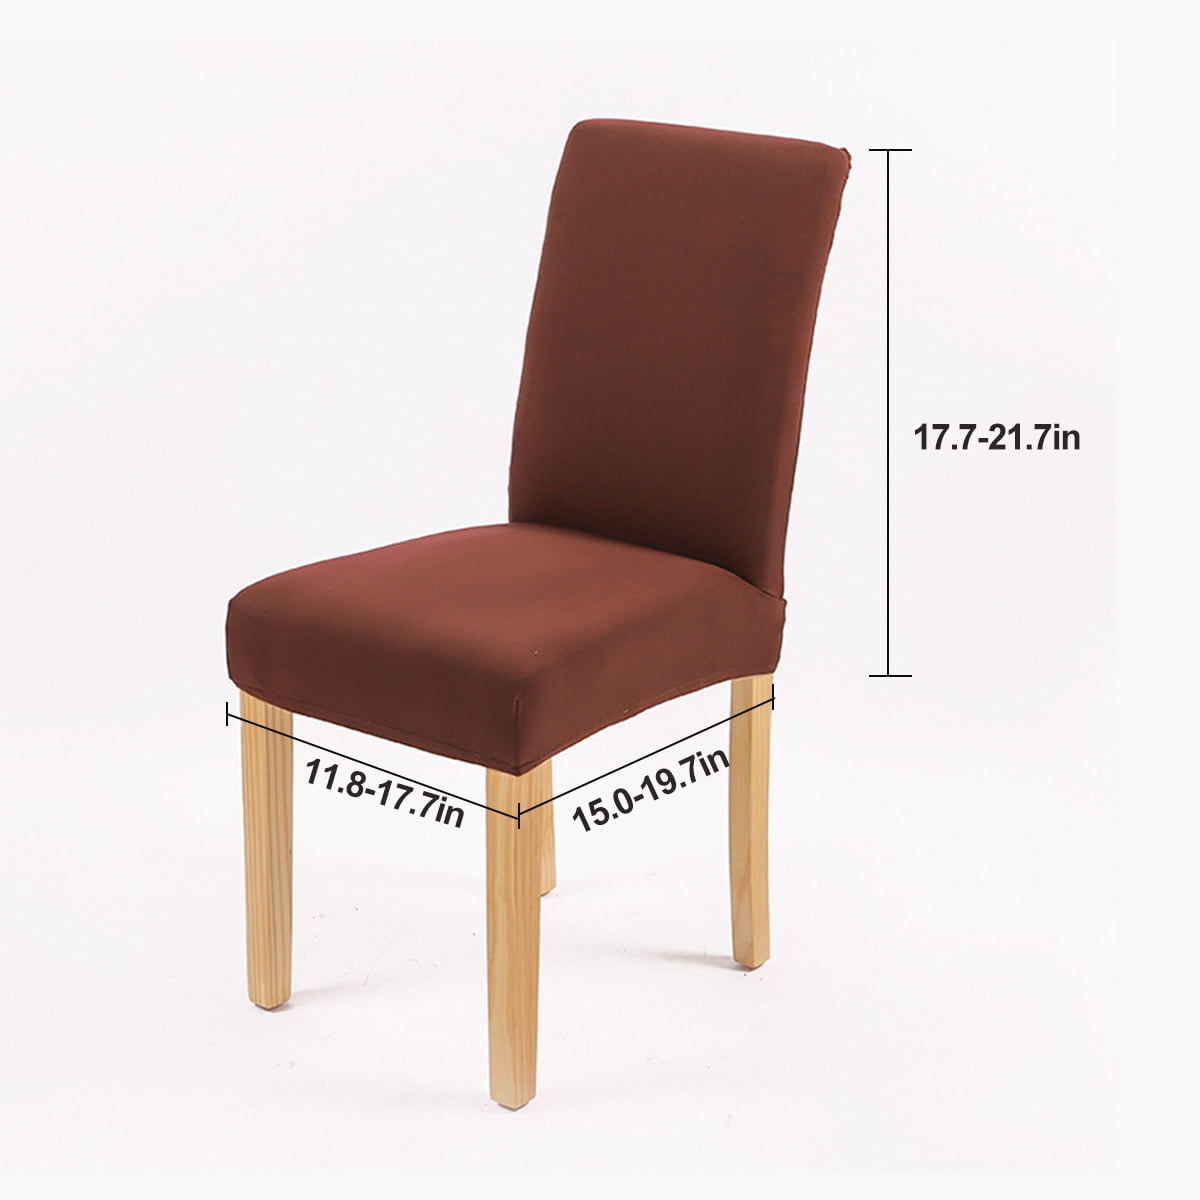 Details about   Dining Chair Covers Home Seat Cover Stretch Spandex Slipcovers Universal Elastic 